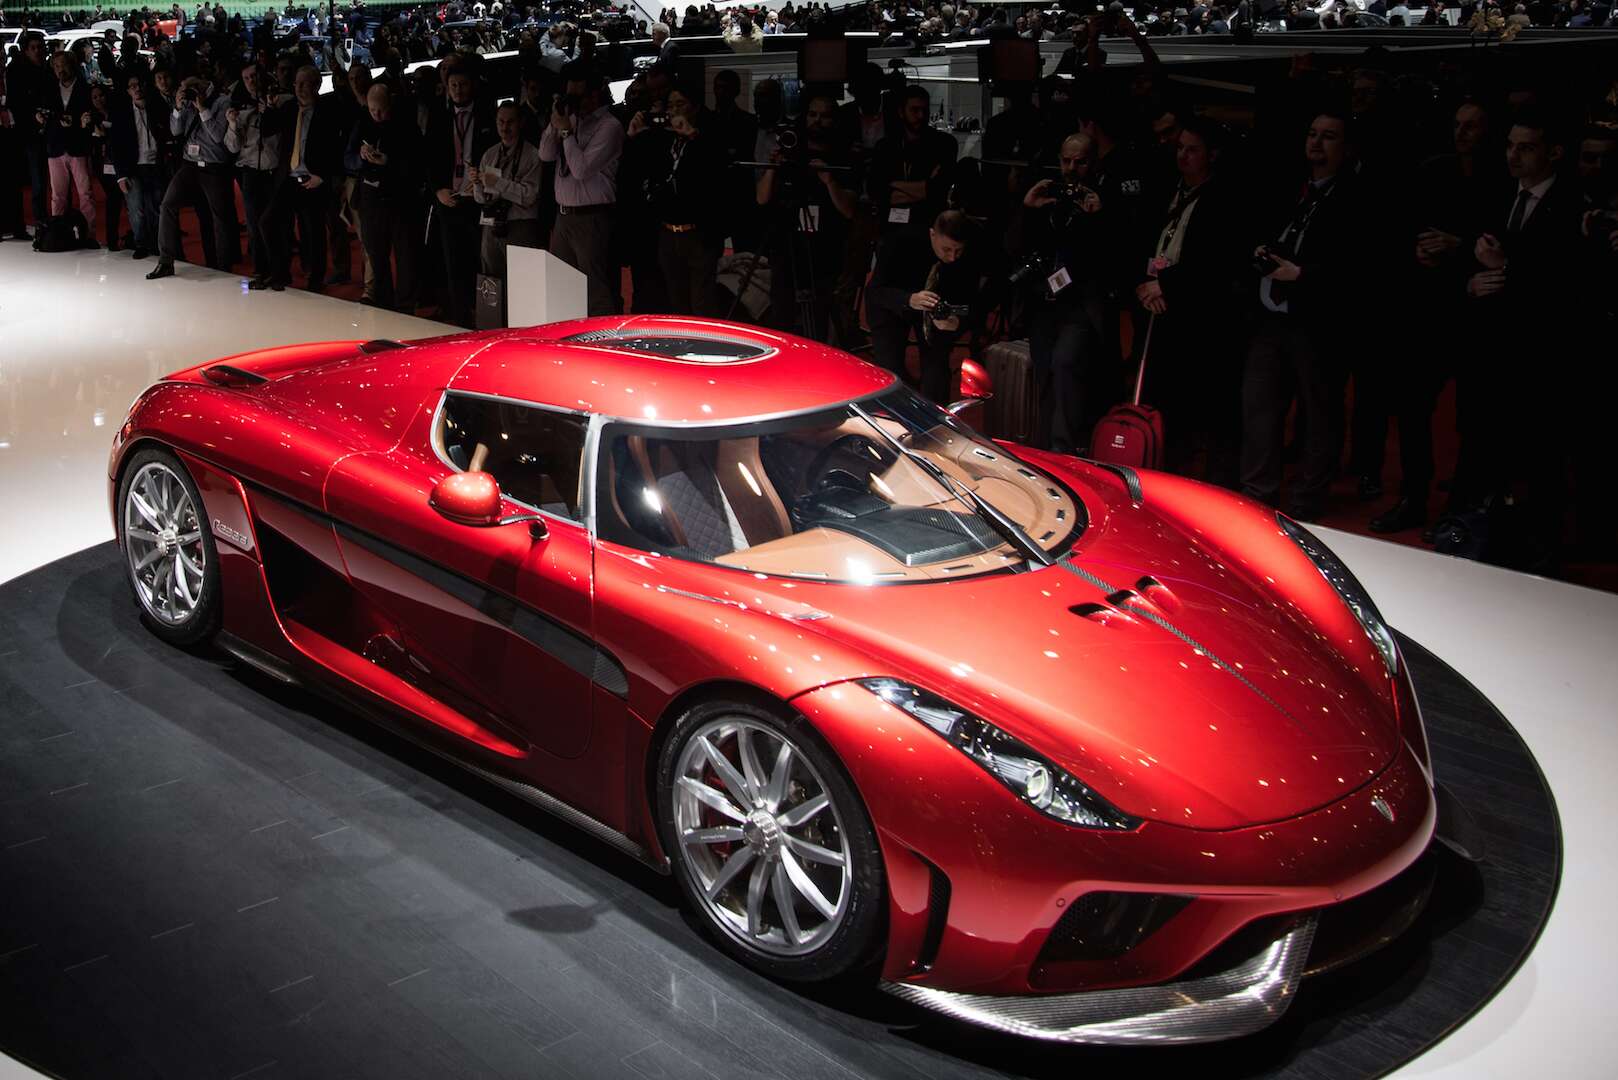 Top 10 Most Expensive Cars in the World 2019 (with interior, cockpit photos)